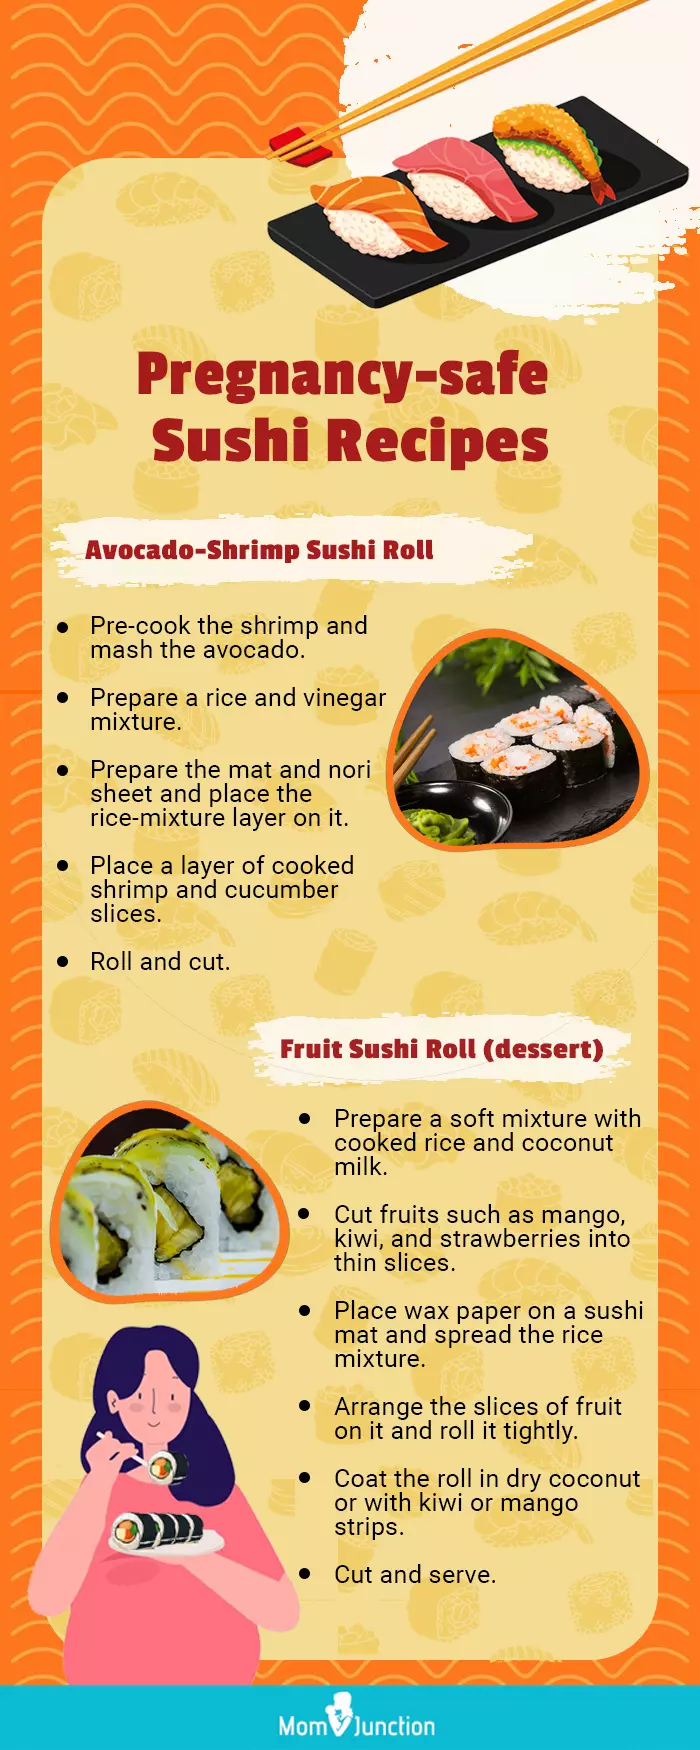 pregnancy safe sushi recipes (infographic)